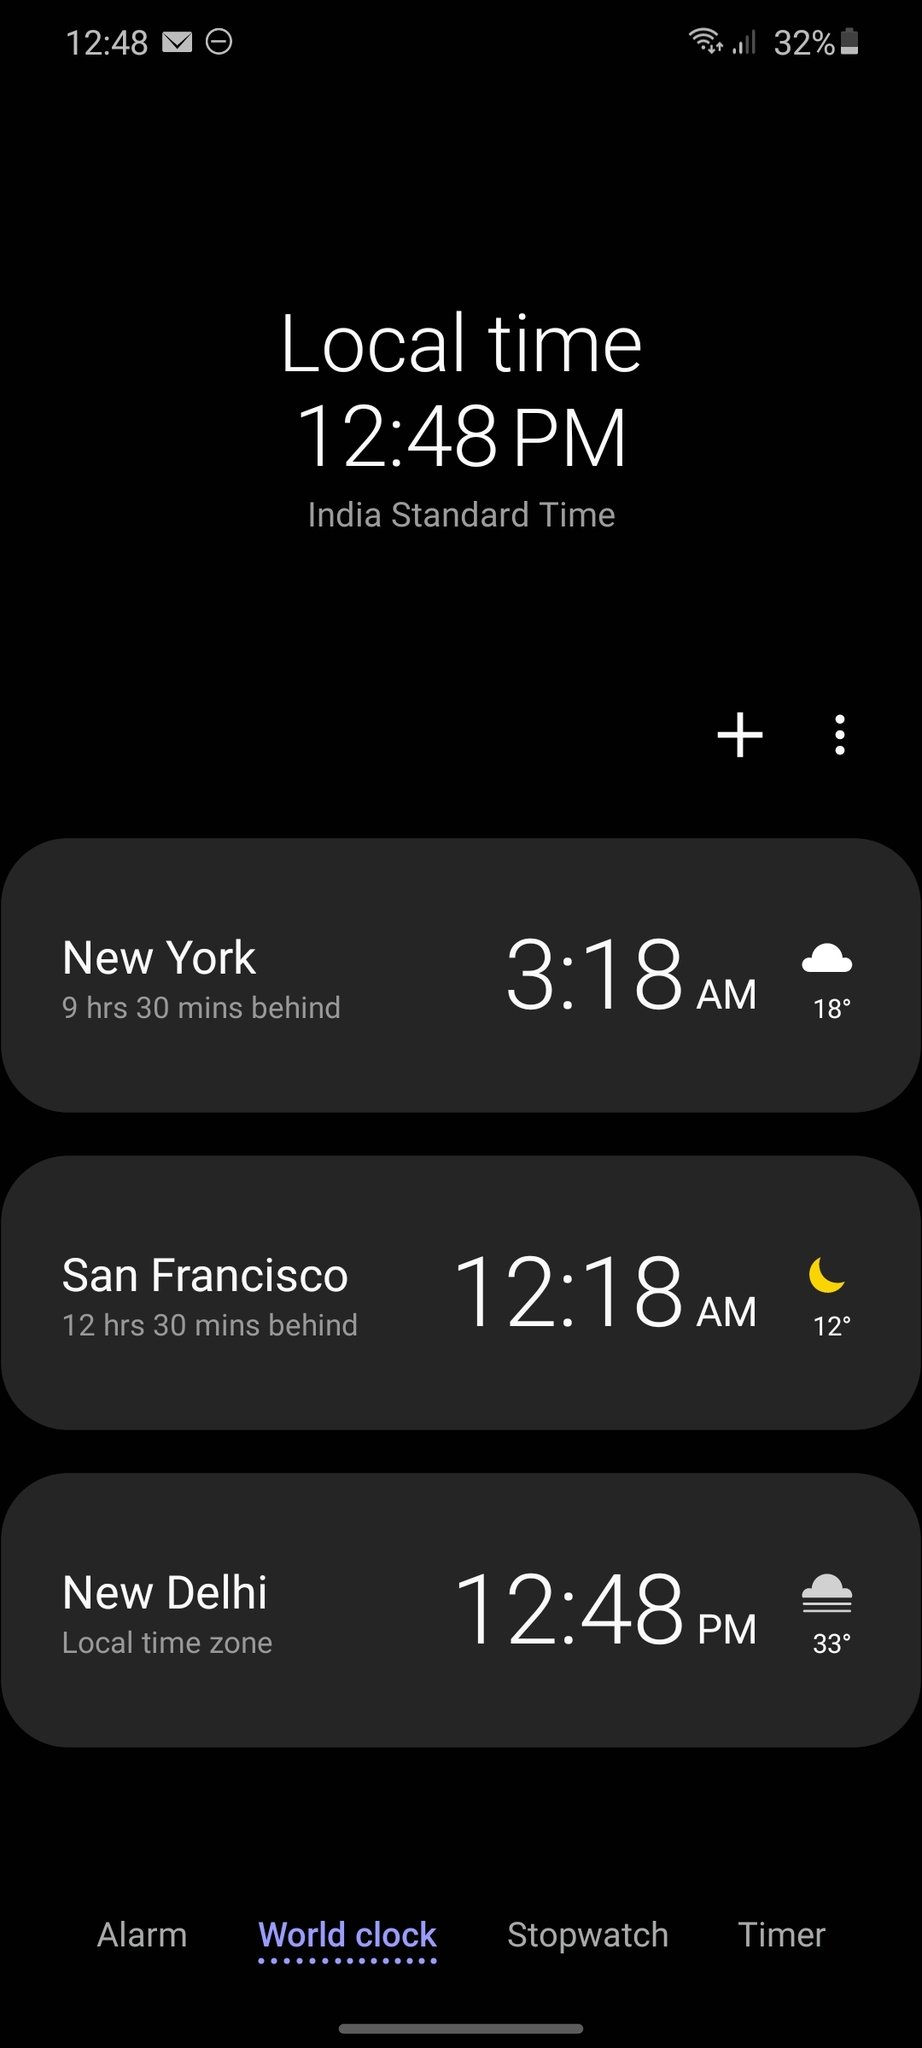 Samsung One UI 2.0 overview